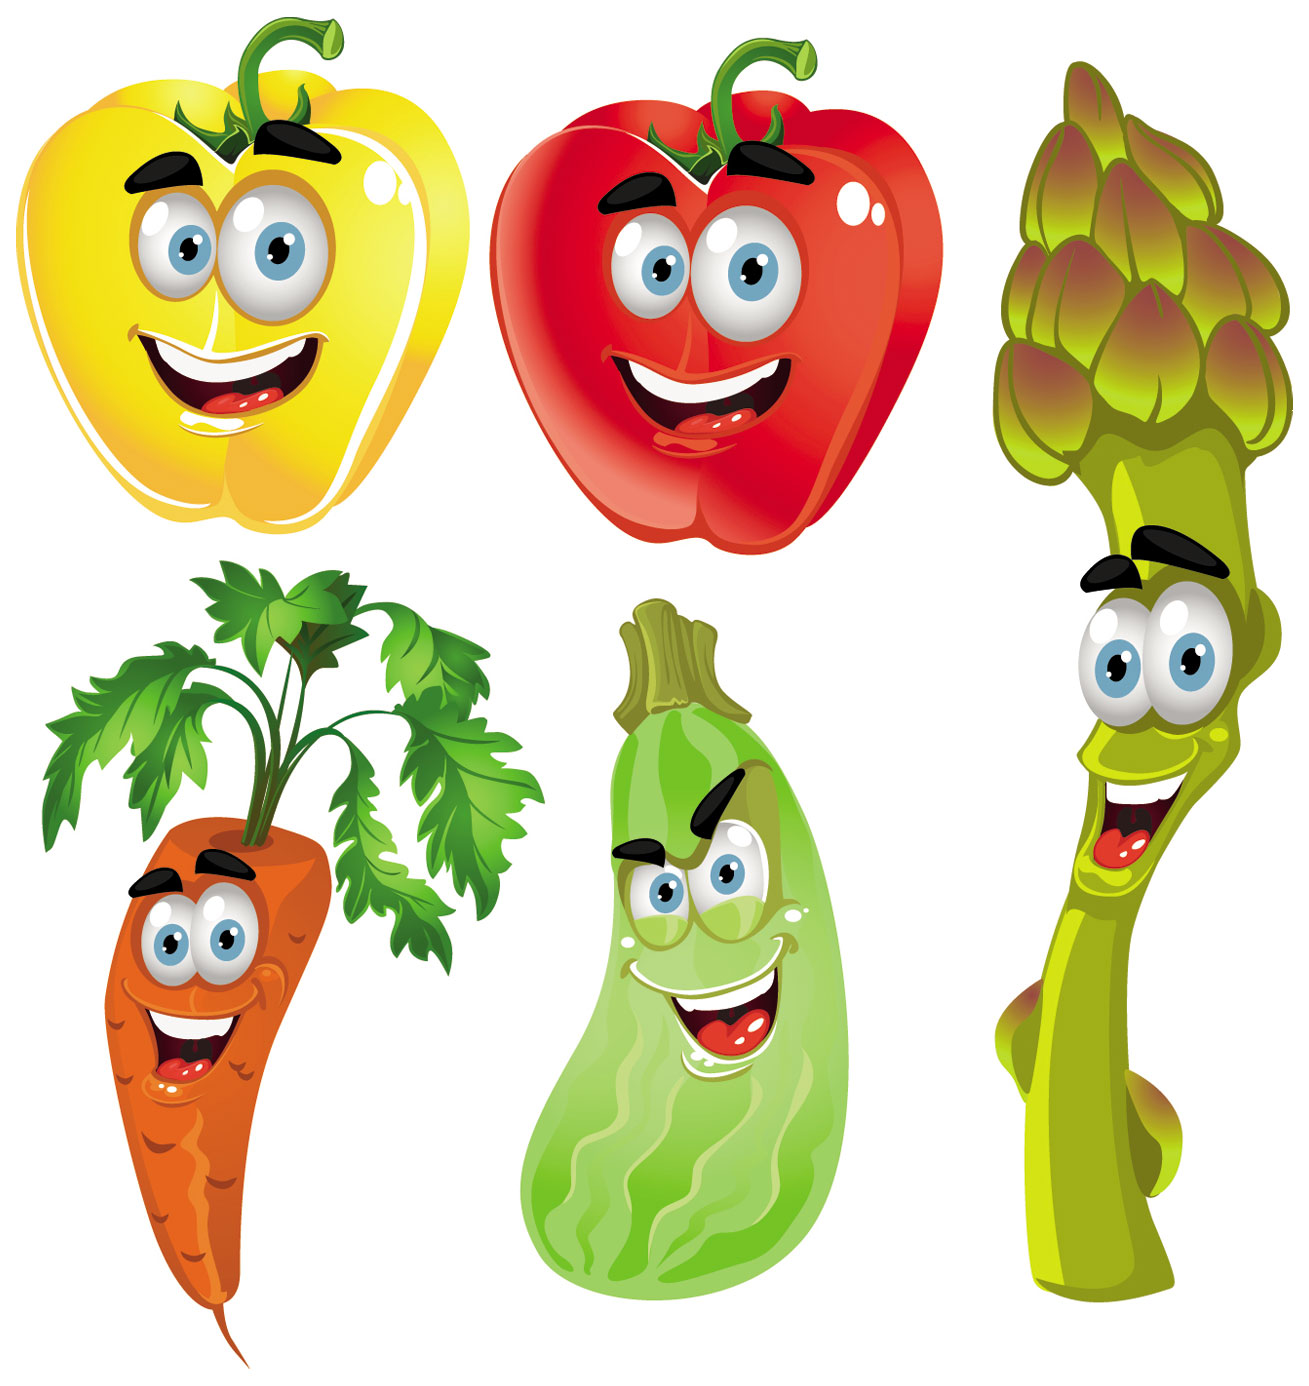 Vegetable cartoon image-4 - Free Clipart Images